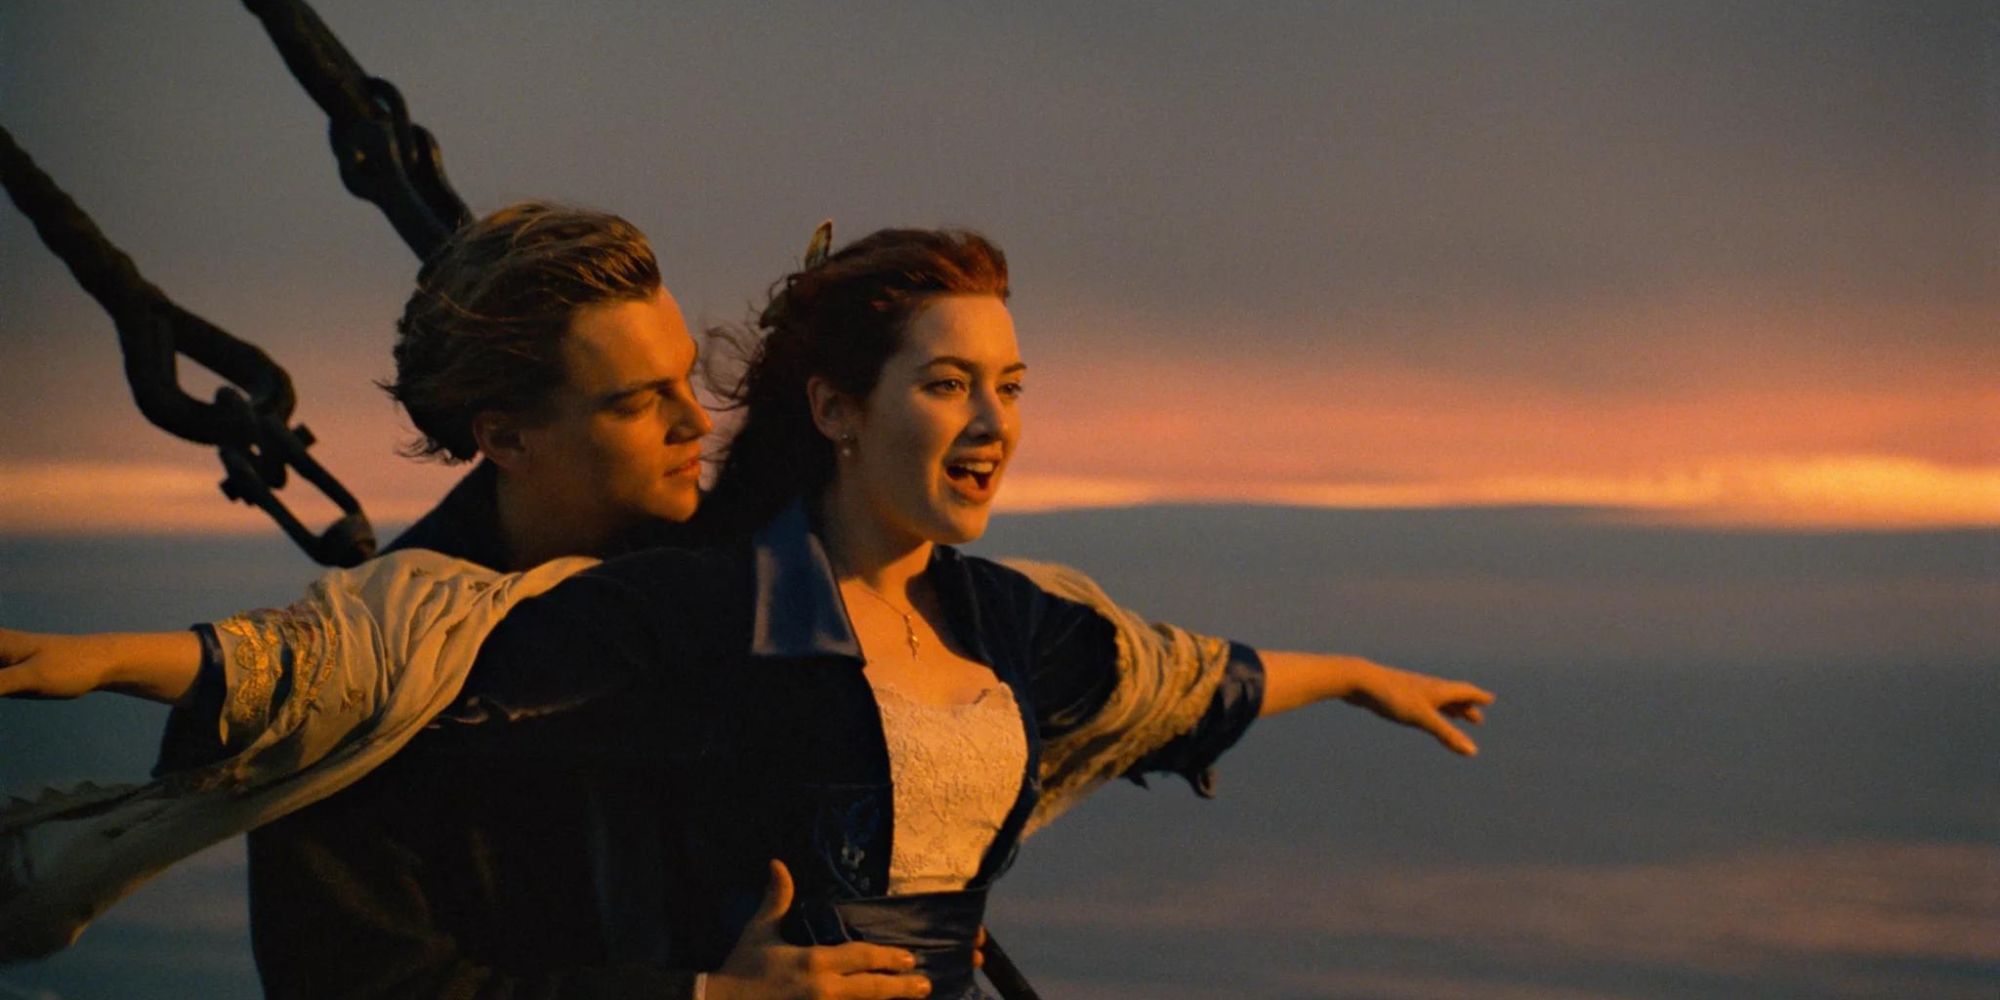 Jack and Rose from Titanic posing on the ship